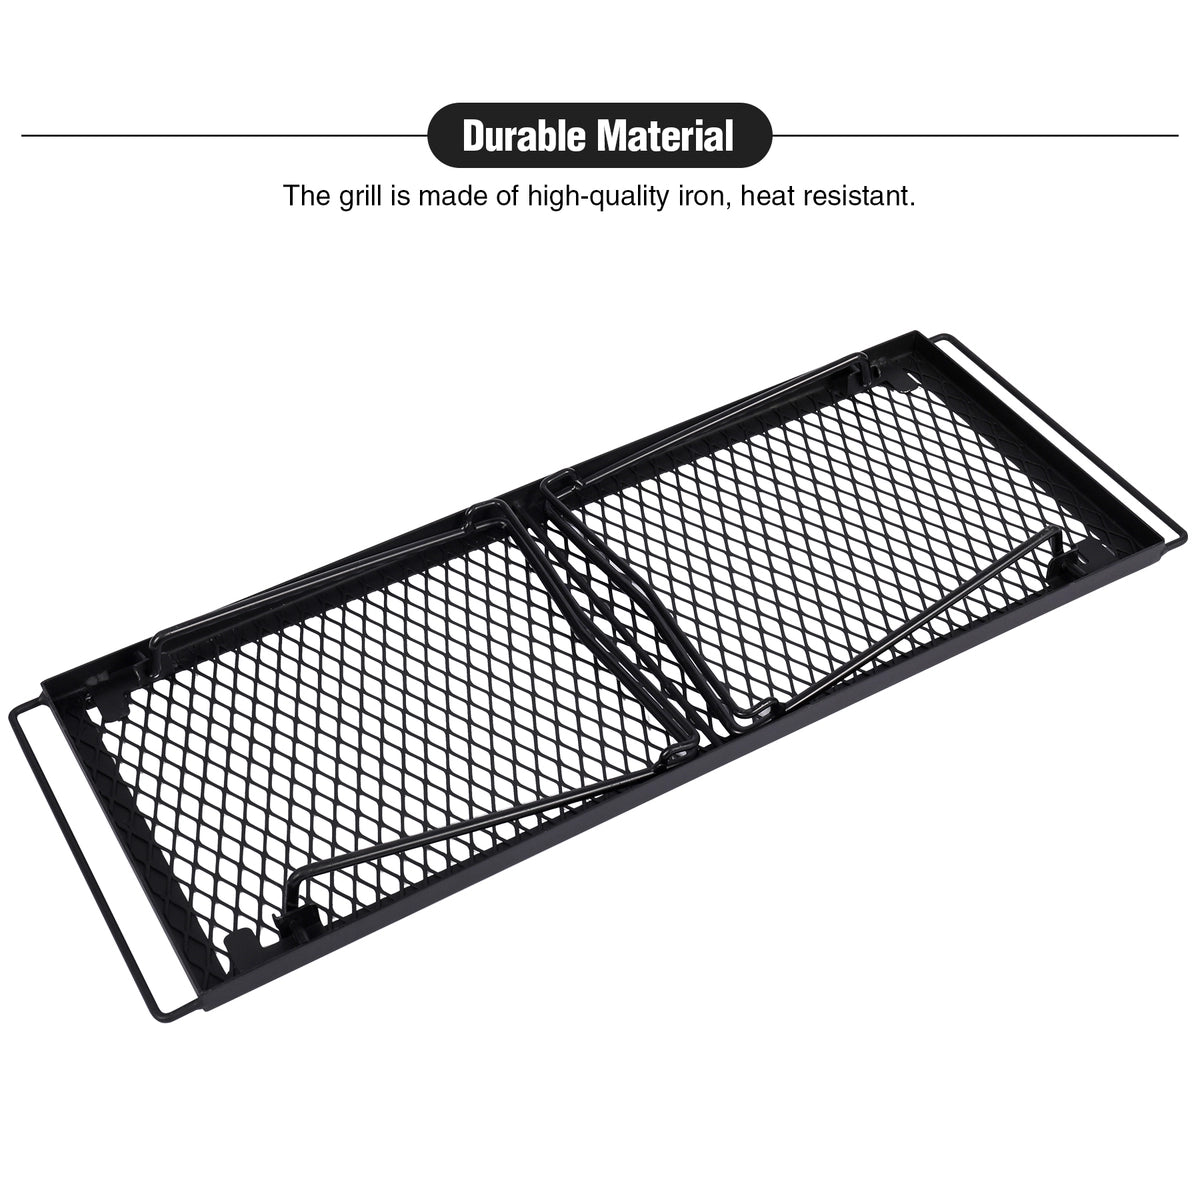 4Pcs Campfire Cooking Grill Stackable Storage Rack